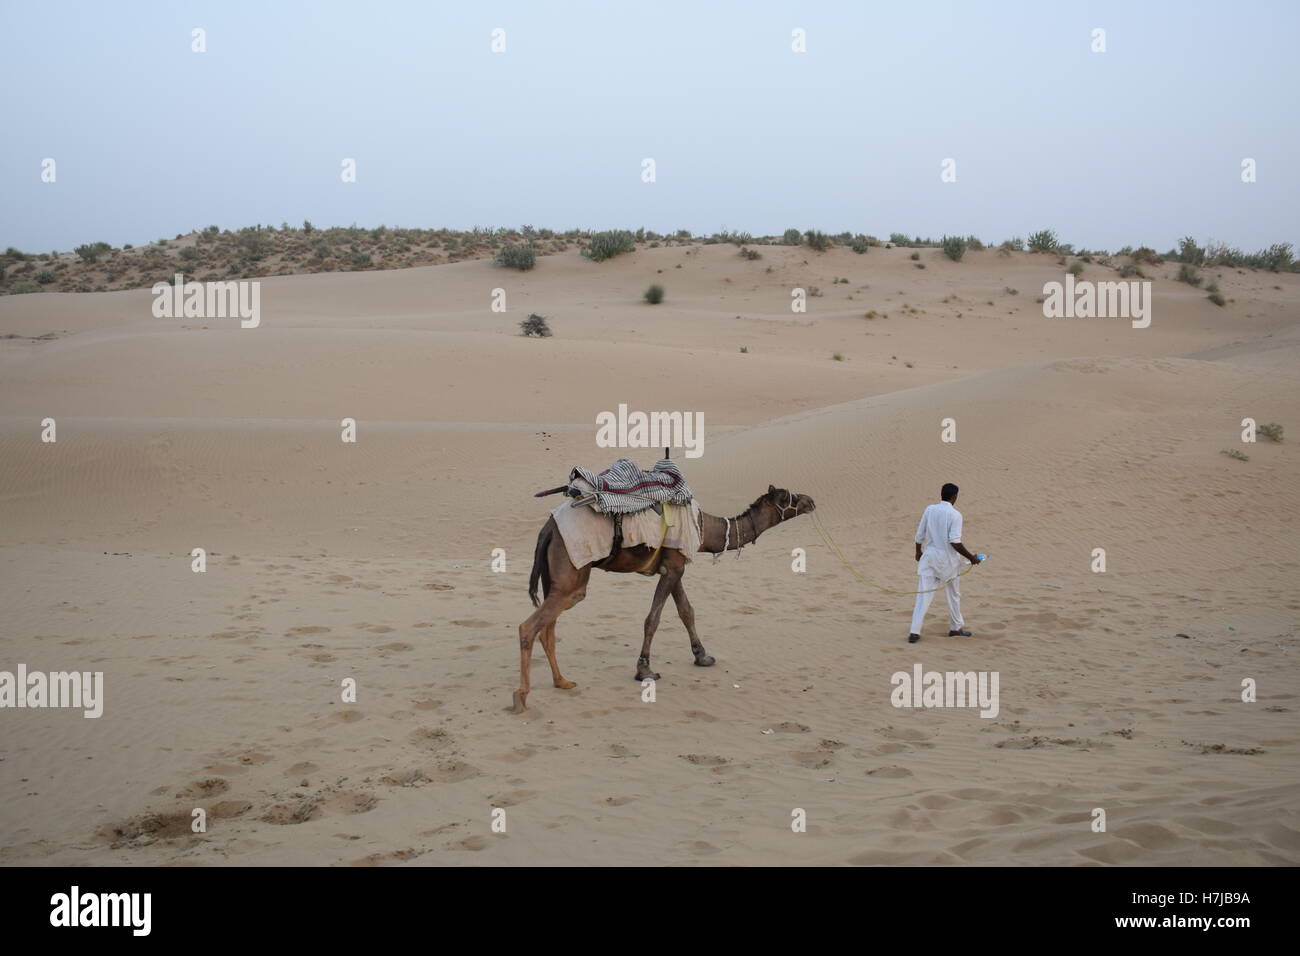 Indian guy with his camel walking on the dunes in Thar desert near Jaisalmer, Rajasthan, India Stock Photo